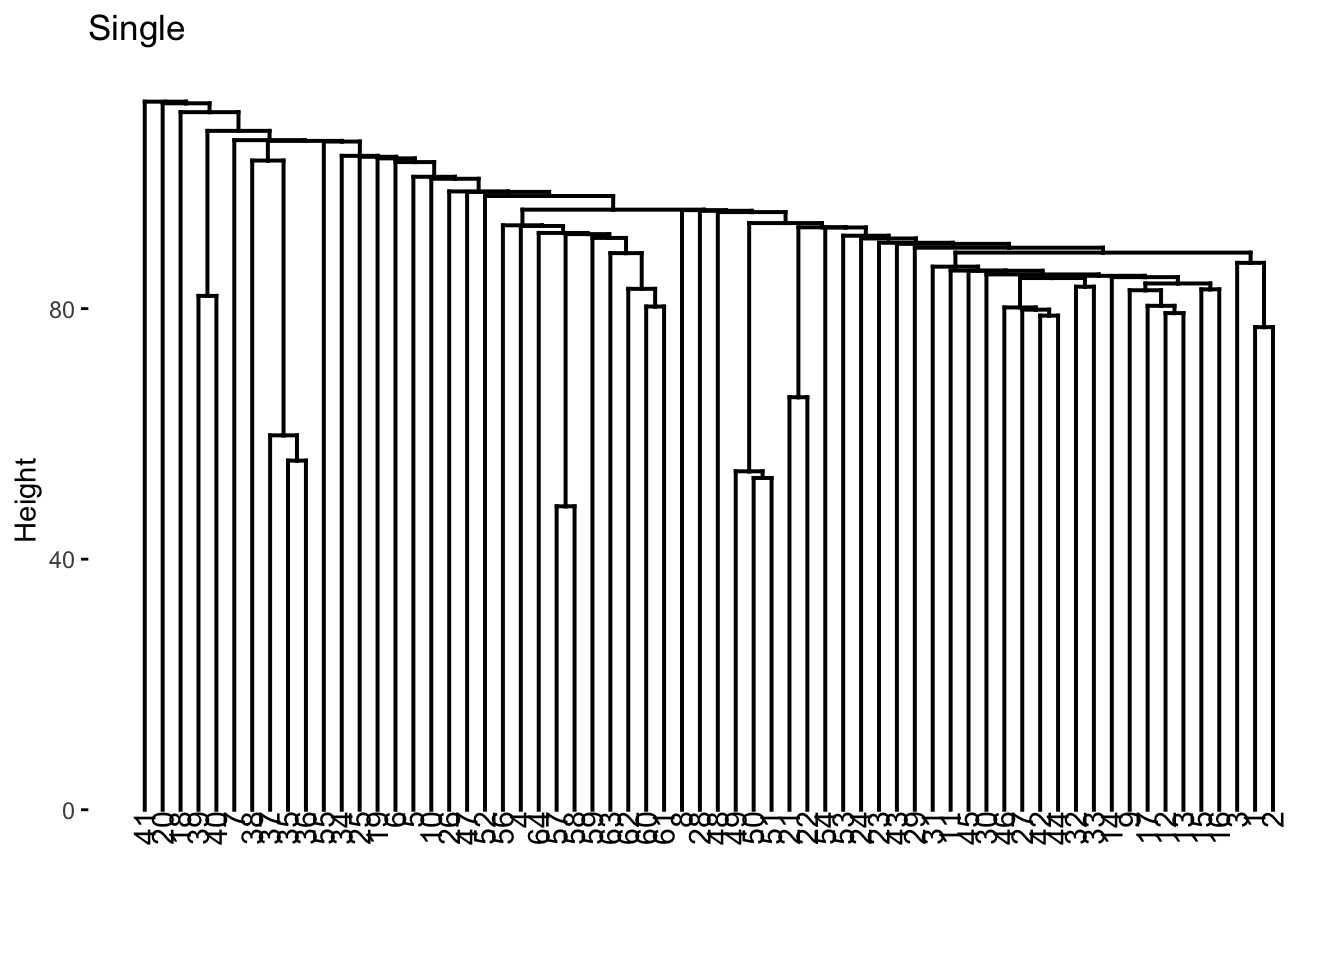 Dendrogram visualization. Not colored, has most of the splits happen at larger hight, very close together, with a few splits a lower heights.